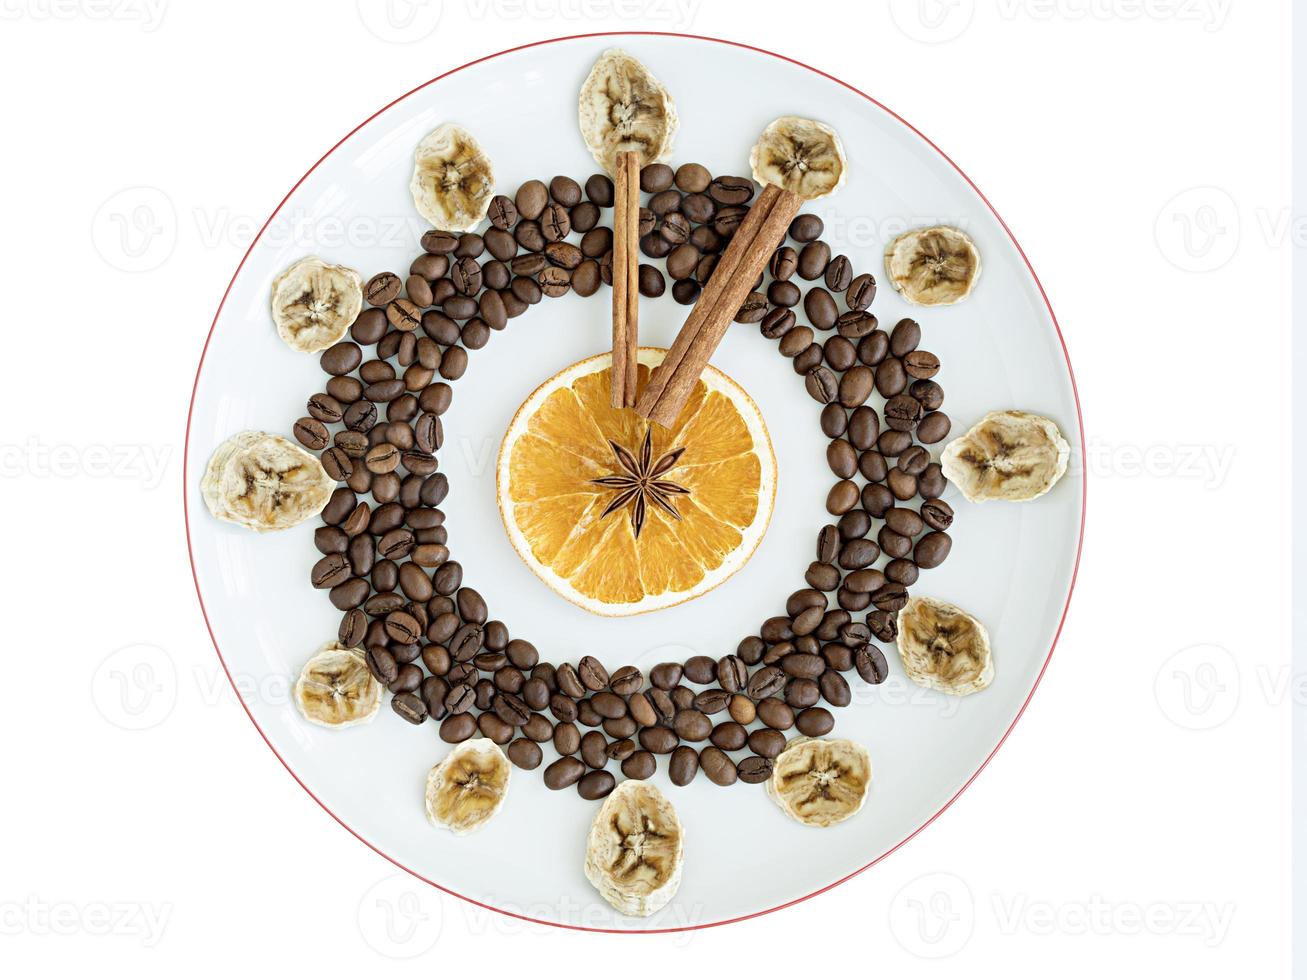 Grains of roasted coffee, mugs of dried orange and banana, cinnamon stick, anise star lie on a porcelain plate in the form of a clock photo